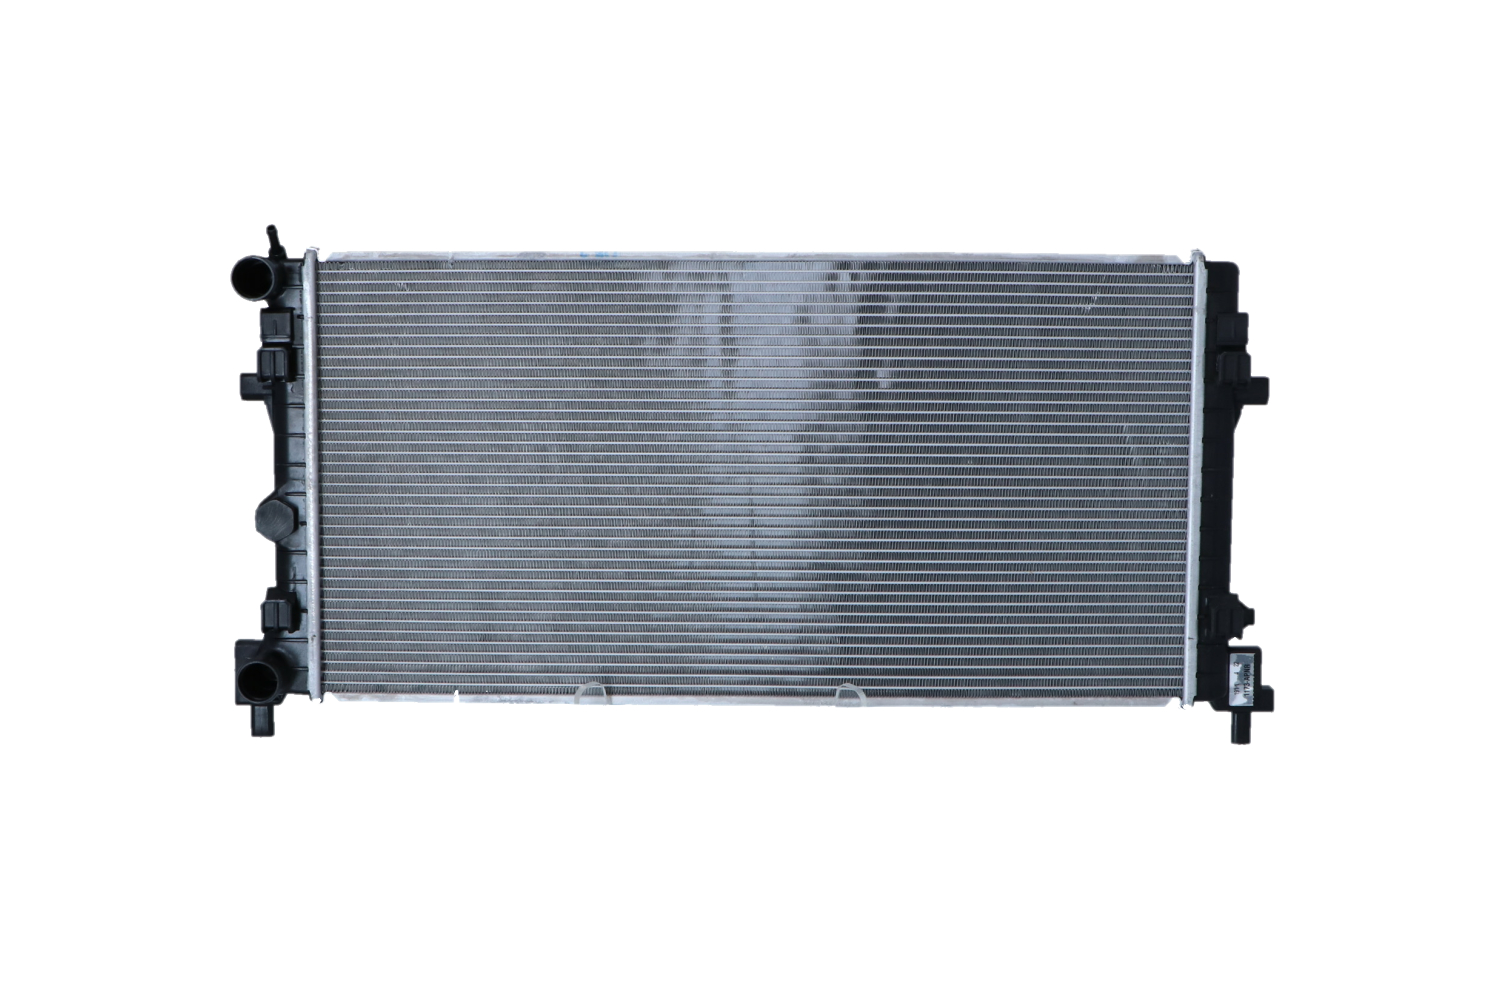 NRF EASY FIT Aluminium, 650 x 308 x 26 mm, with mounting parts, Brazed cooling fins Radiator 53024 buy